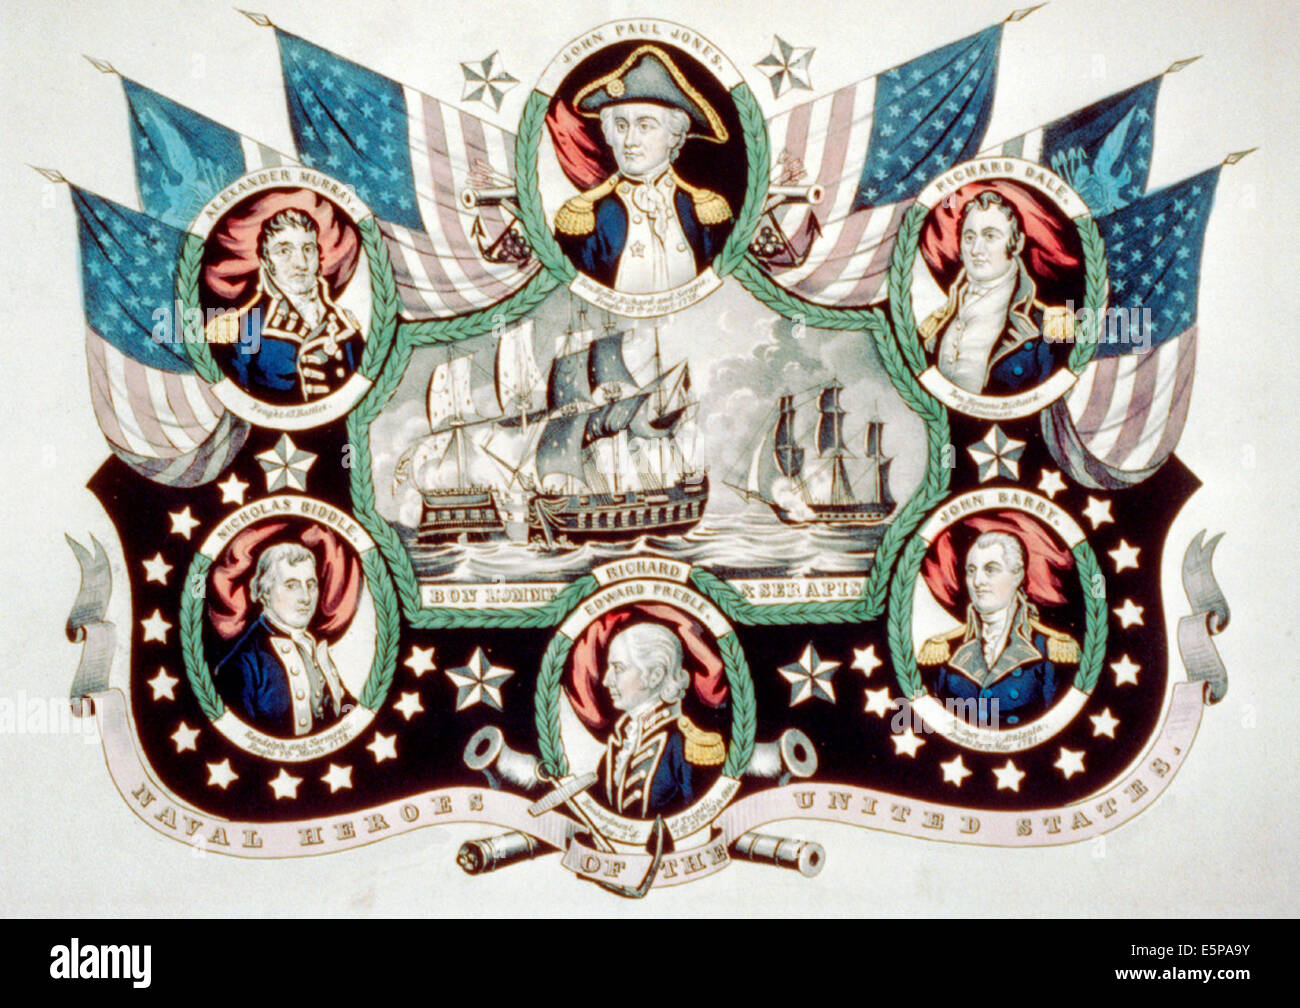 Naval heroes of the United States. Portraits of Revolutionary War American naval officers John Paul Jones, Alexander Murray, Richard Dale, John Barry Edward Preble, and Nicholas Biddle surrounding a vignette of the battle between the Bon Homme Richard and the Serapis. Stock Photo